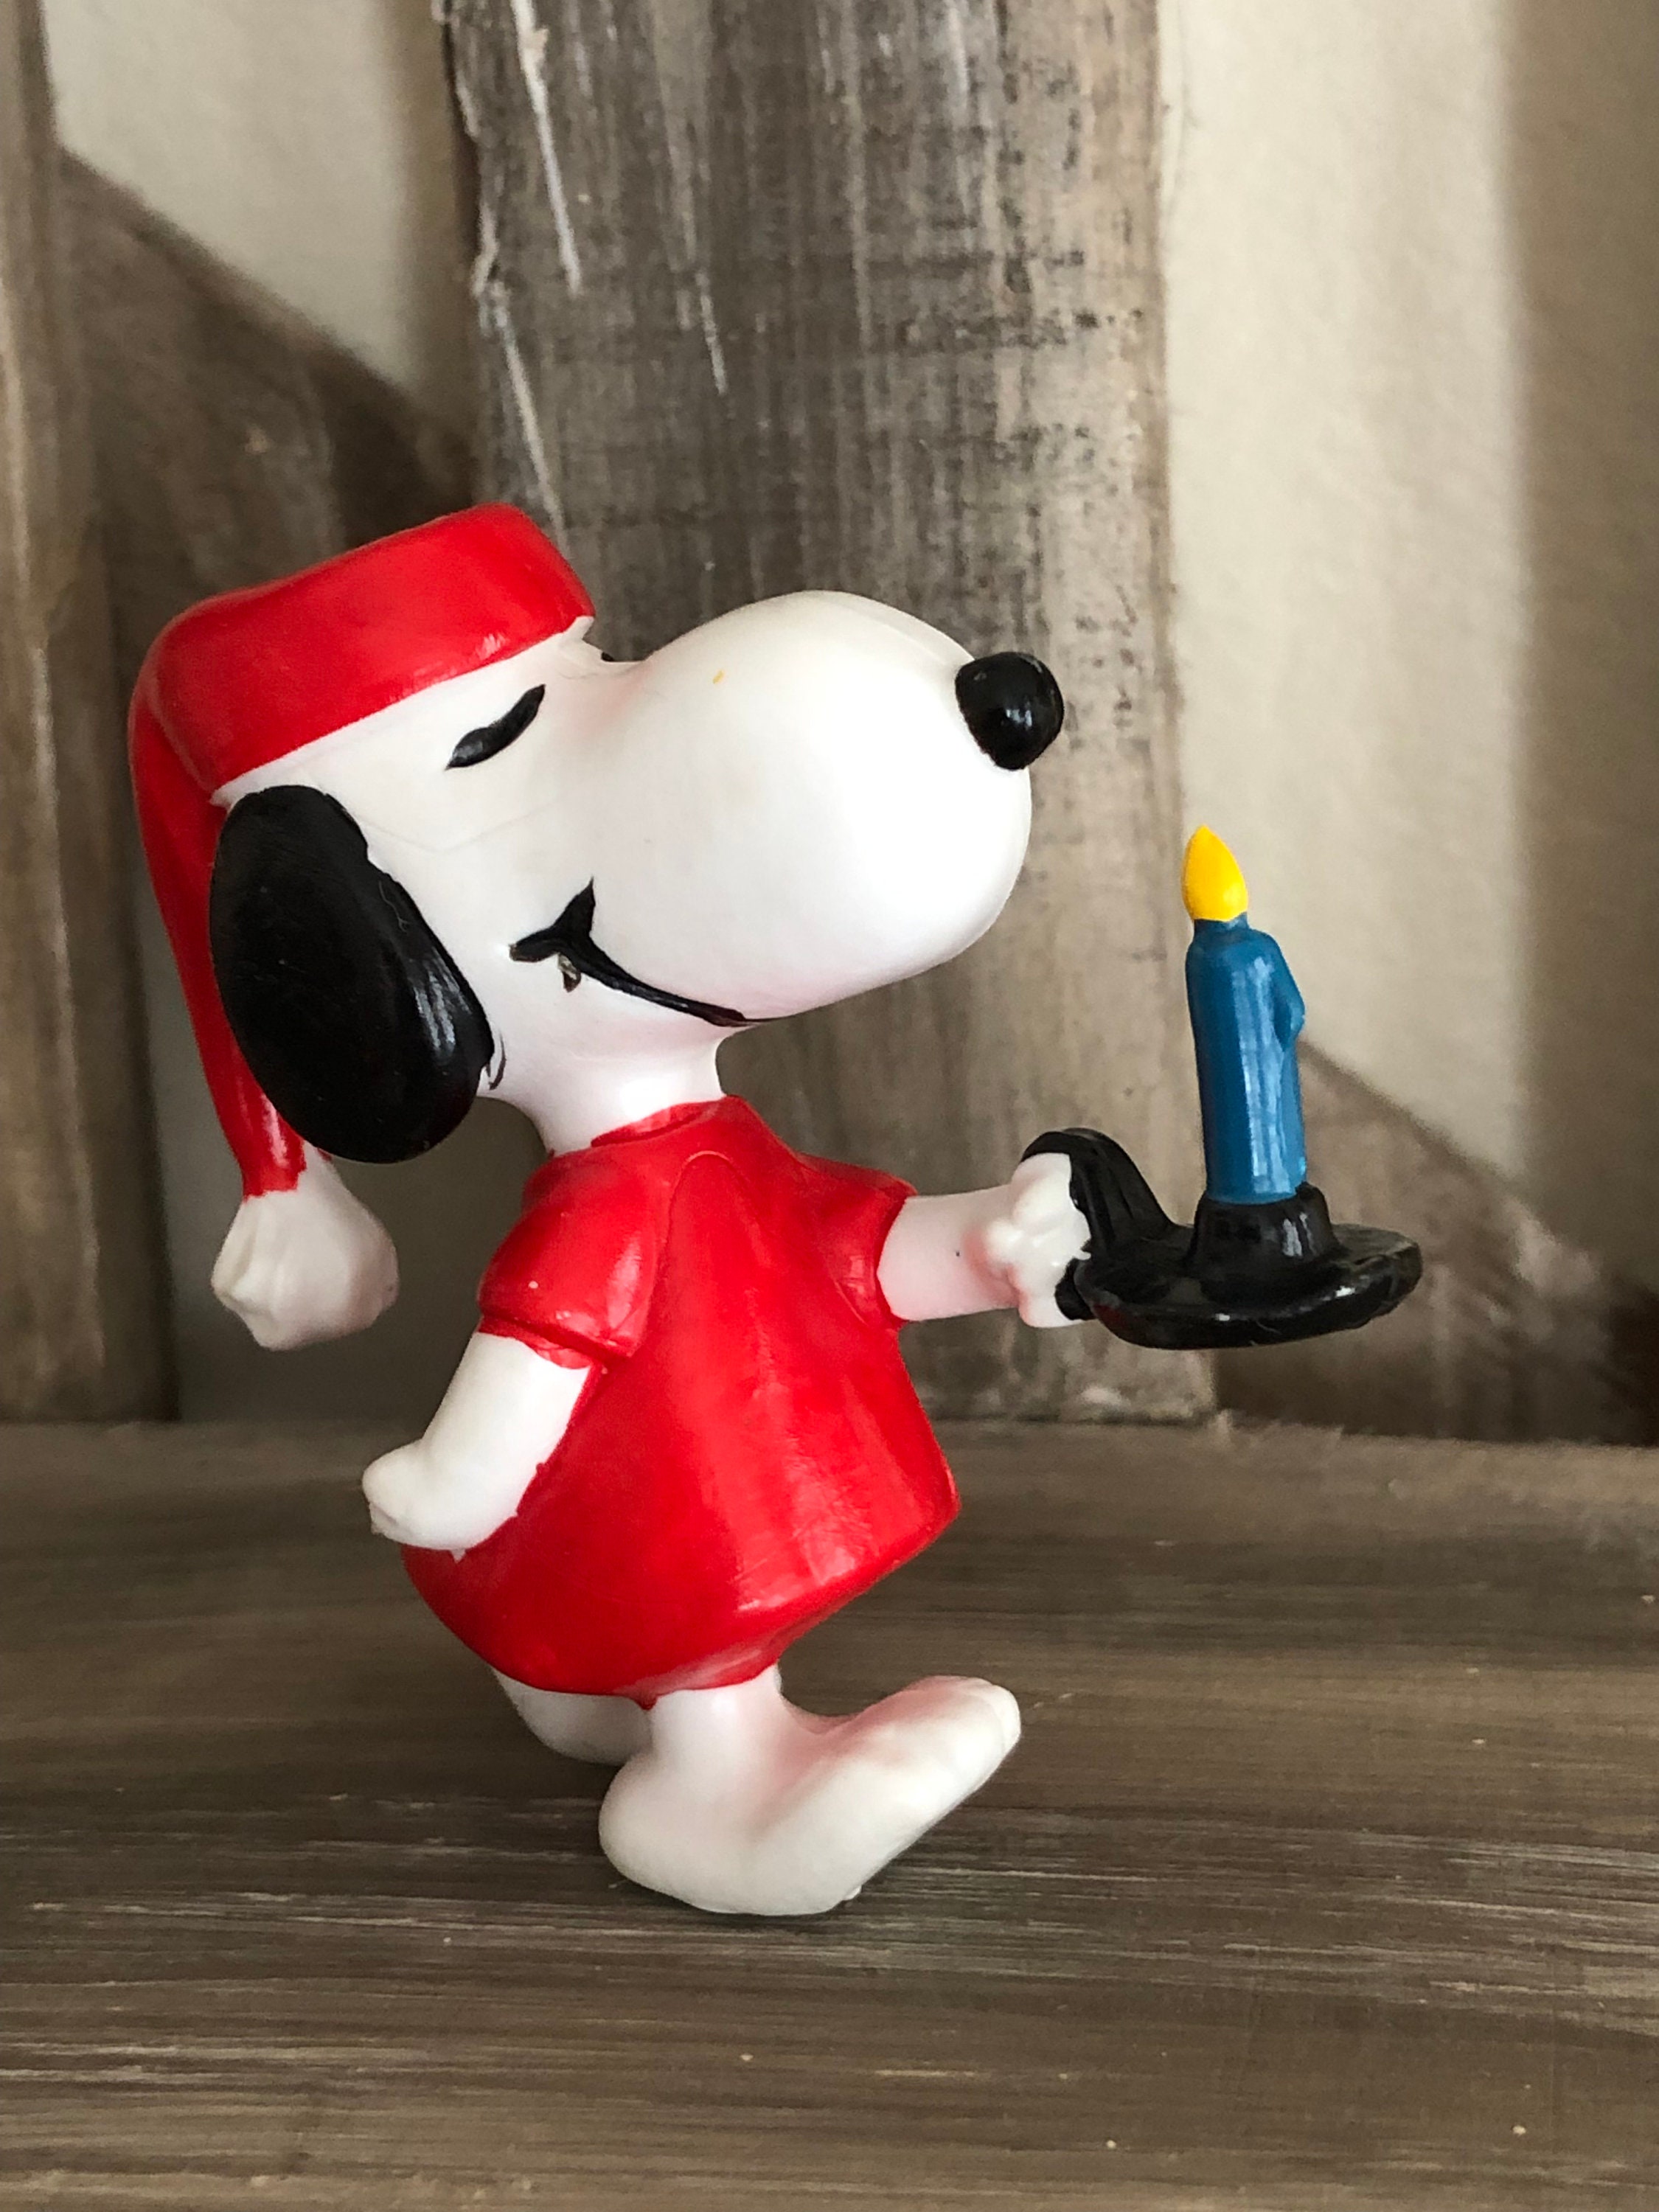 Snoopy and Woodstock Figures - All Star Memory Lane (Red Uniform) - Sn